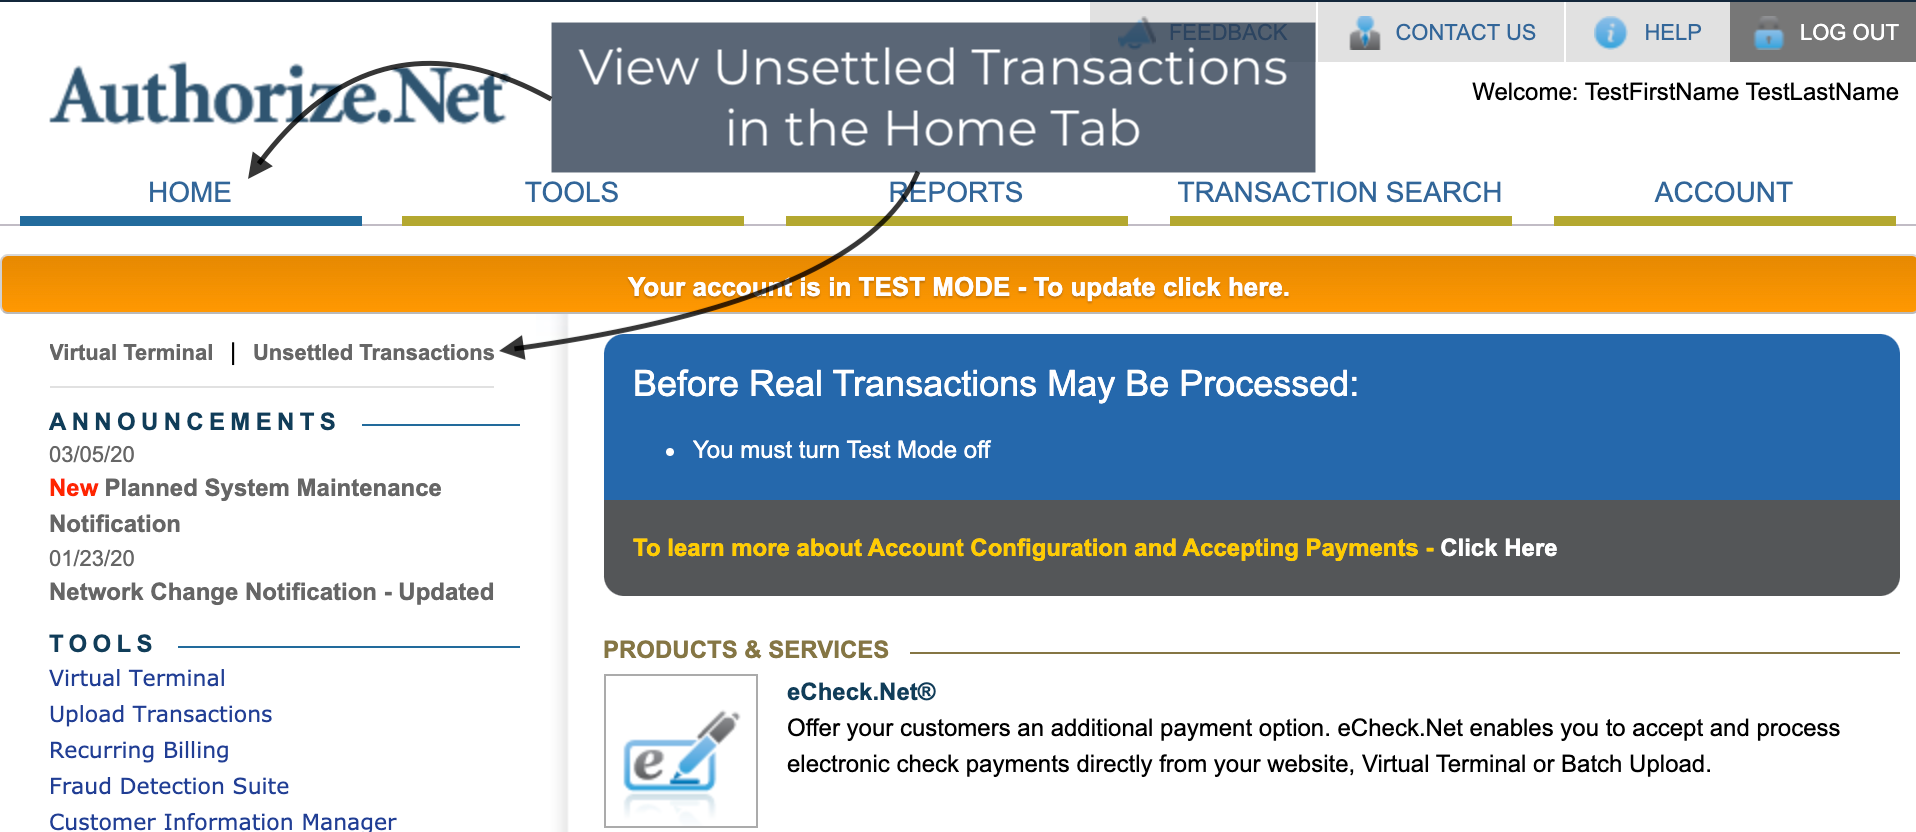 AuthNet Unsettled Transactions